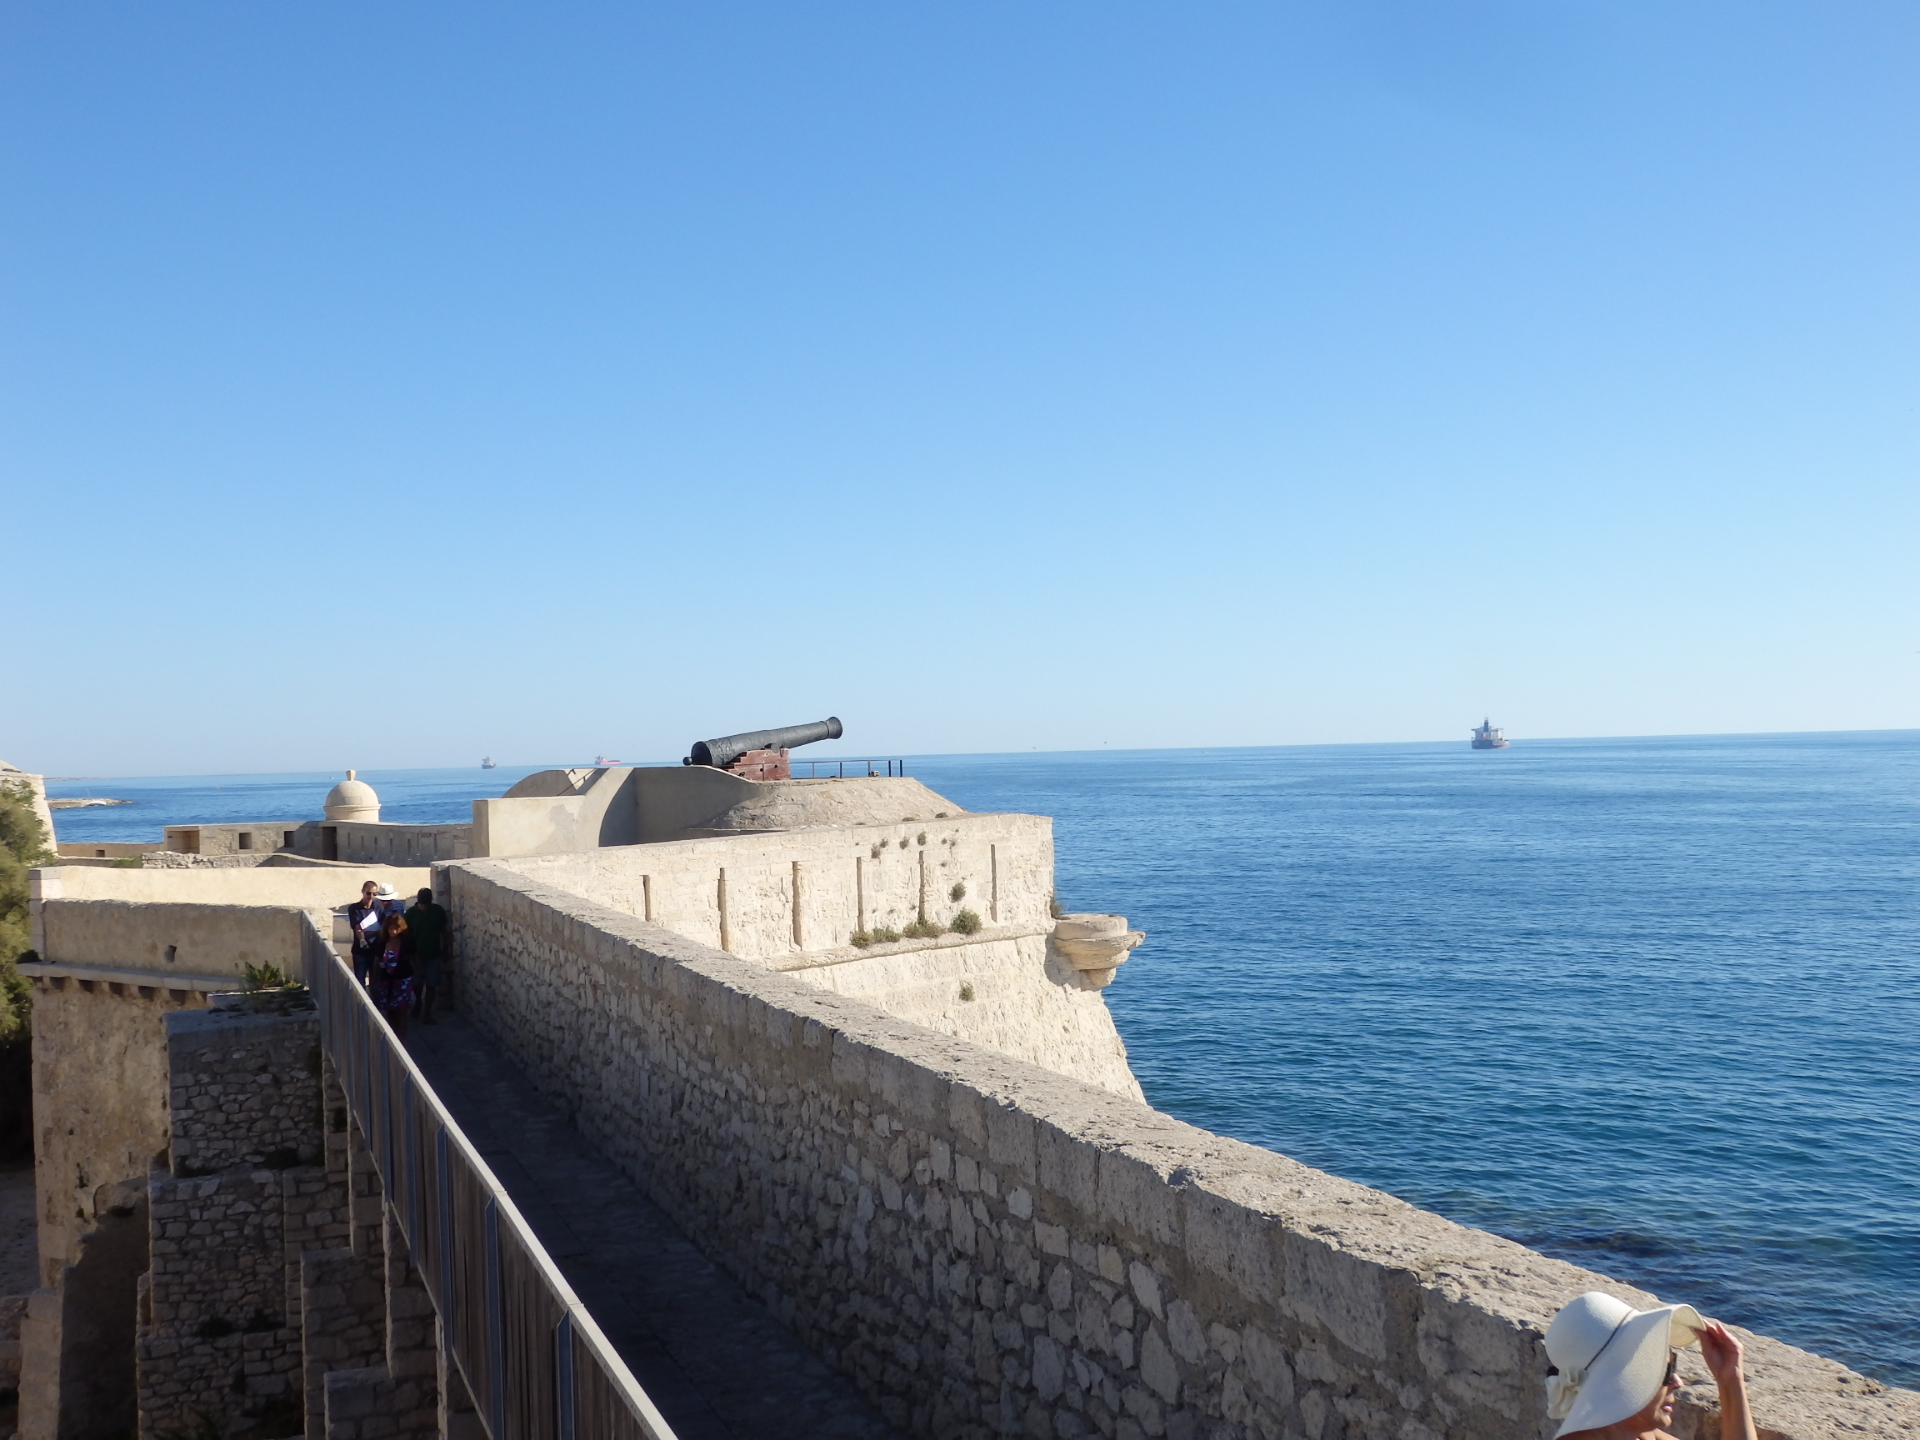 View from the Fort de Bouc